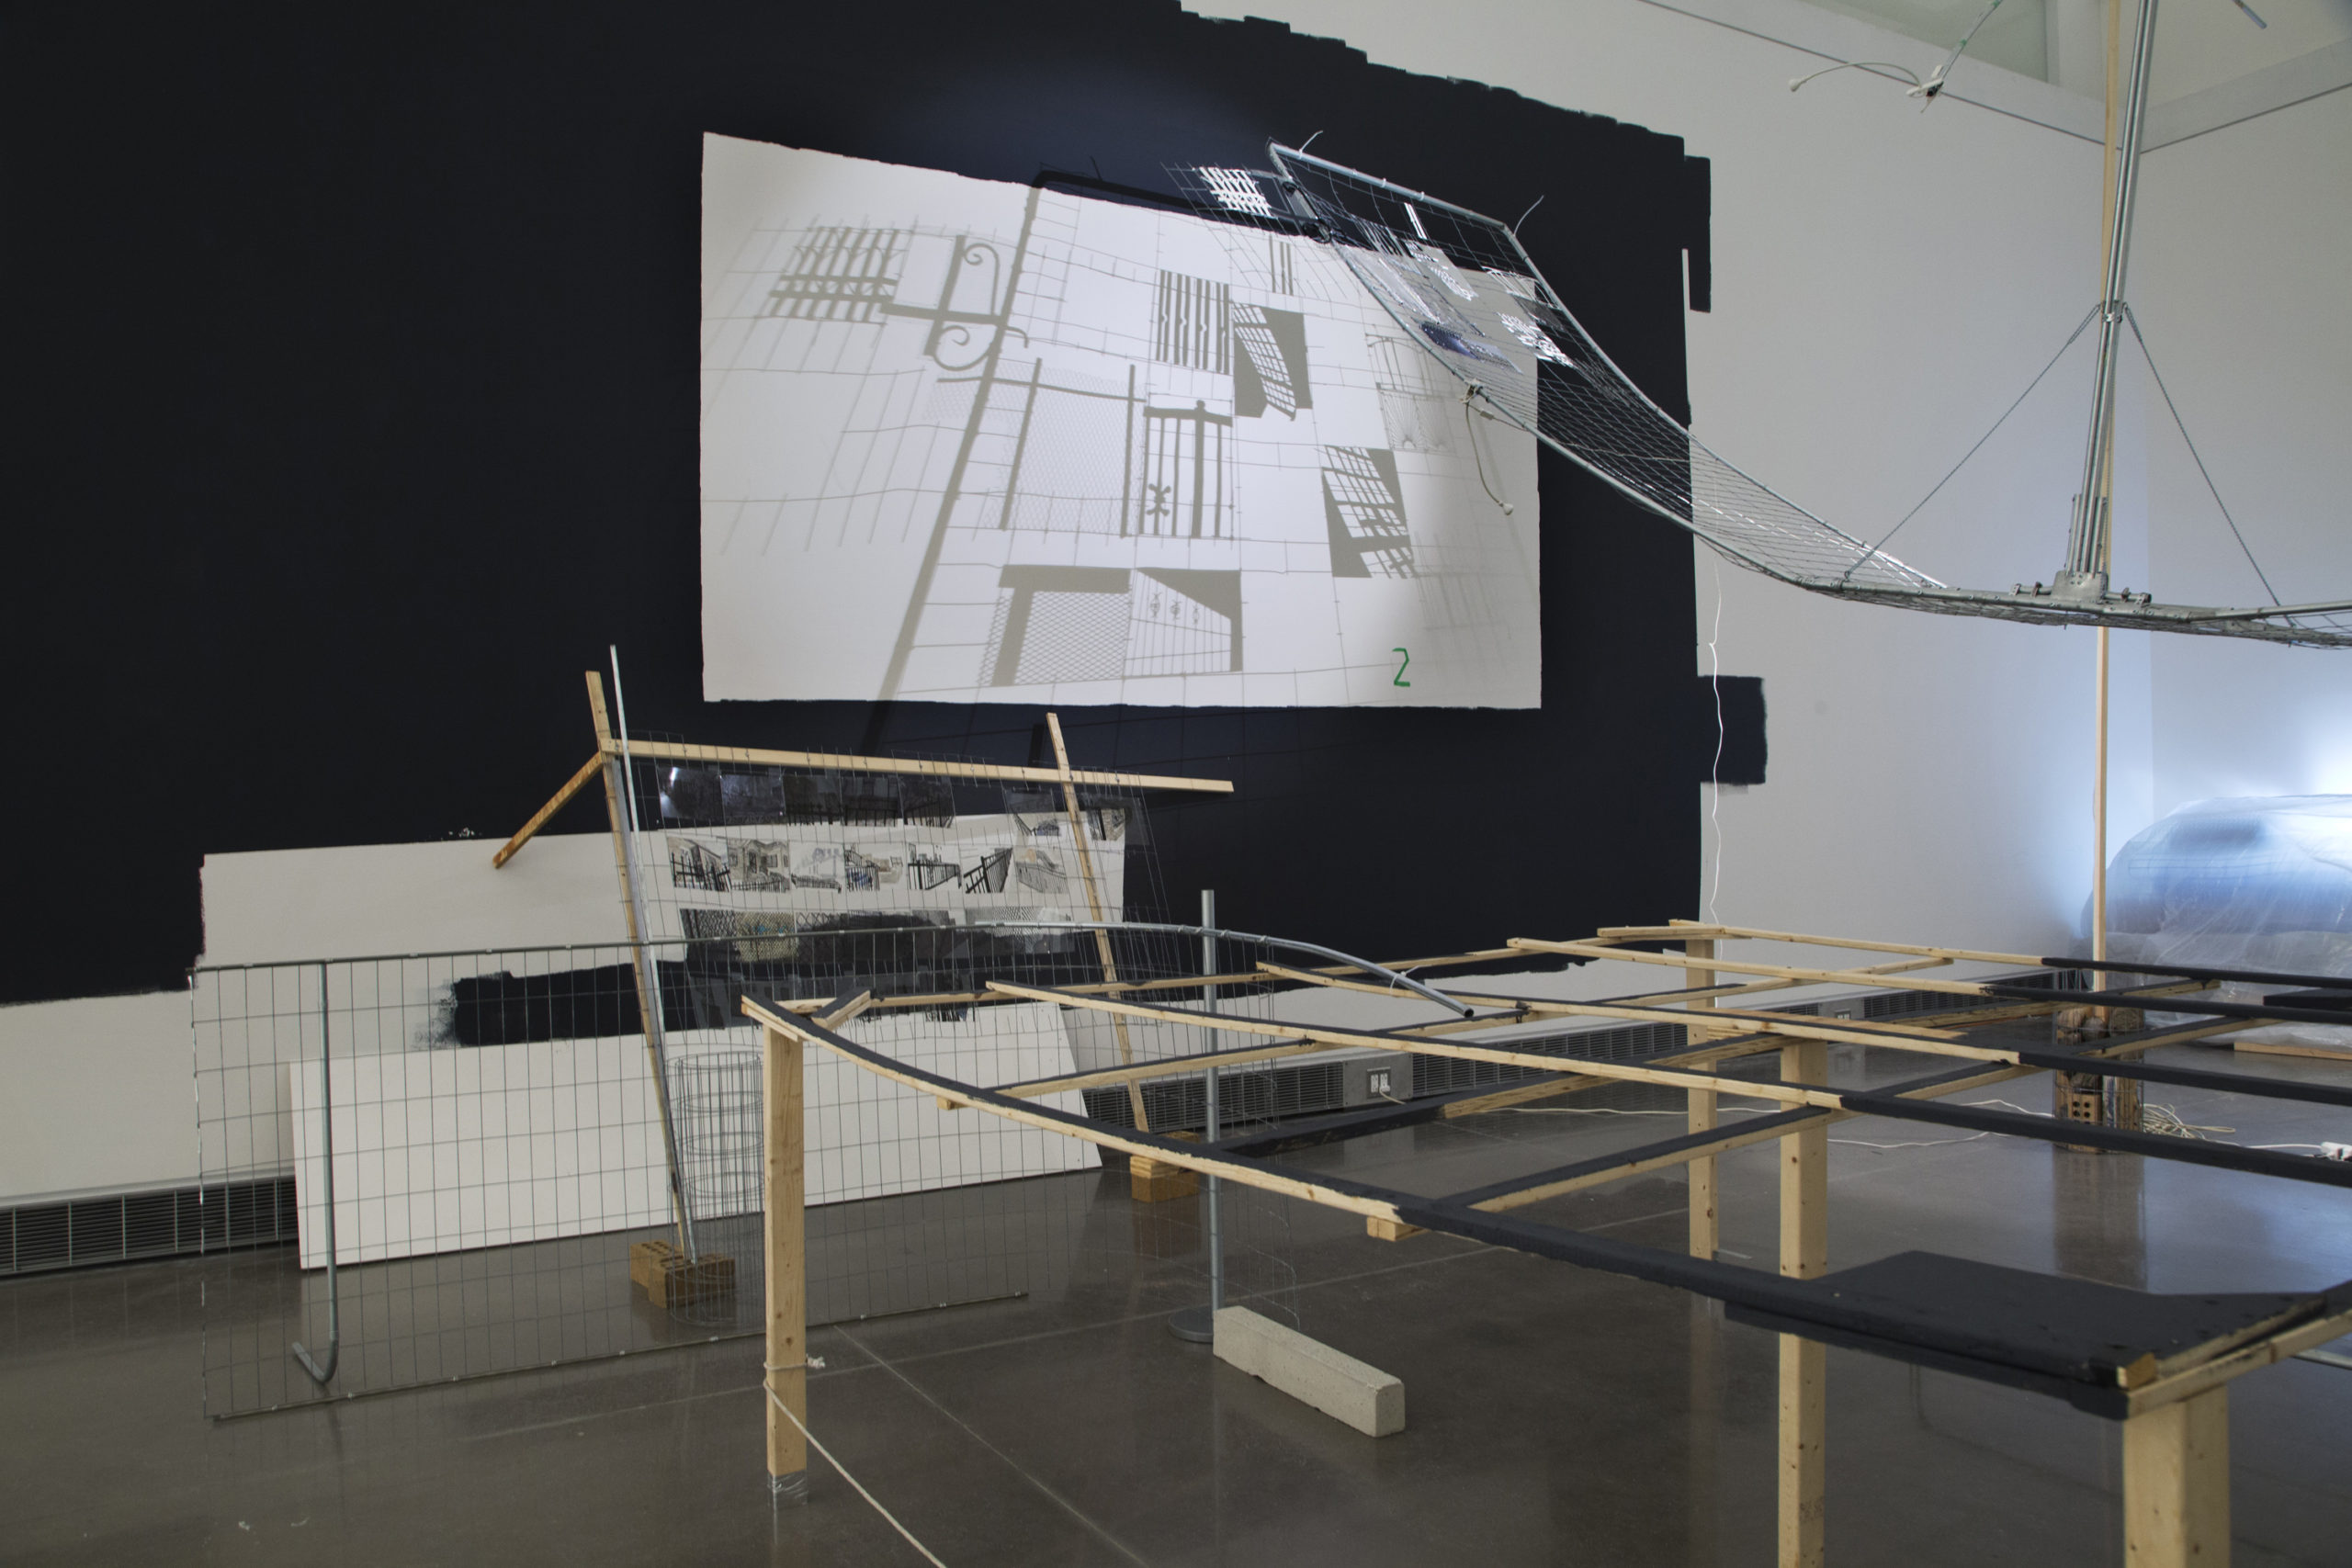 A sculpture installation made up of construction materials including thin pieces of wood, black fabric, metal pipes, and fencing. The materials are loosely linked together to create uncontained spaces. In the background the exhibition wall is covered with black fabric. Layered on the fabric is paper with a simple gridded drawing similar to the patterns found in the sculpture installation.